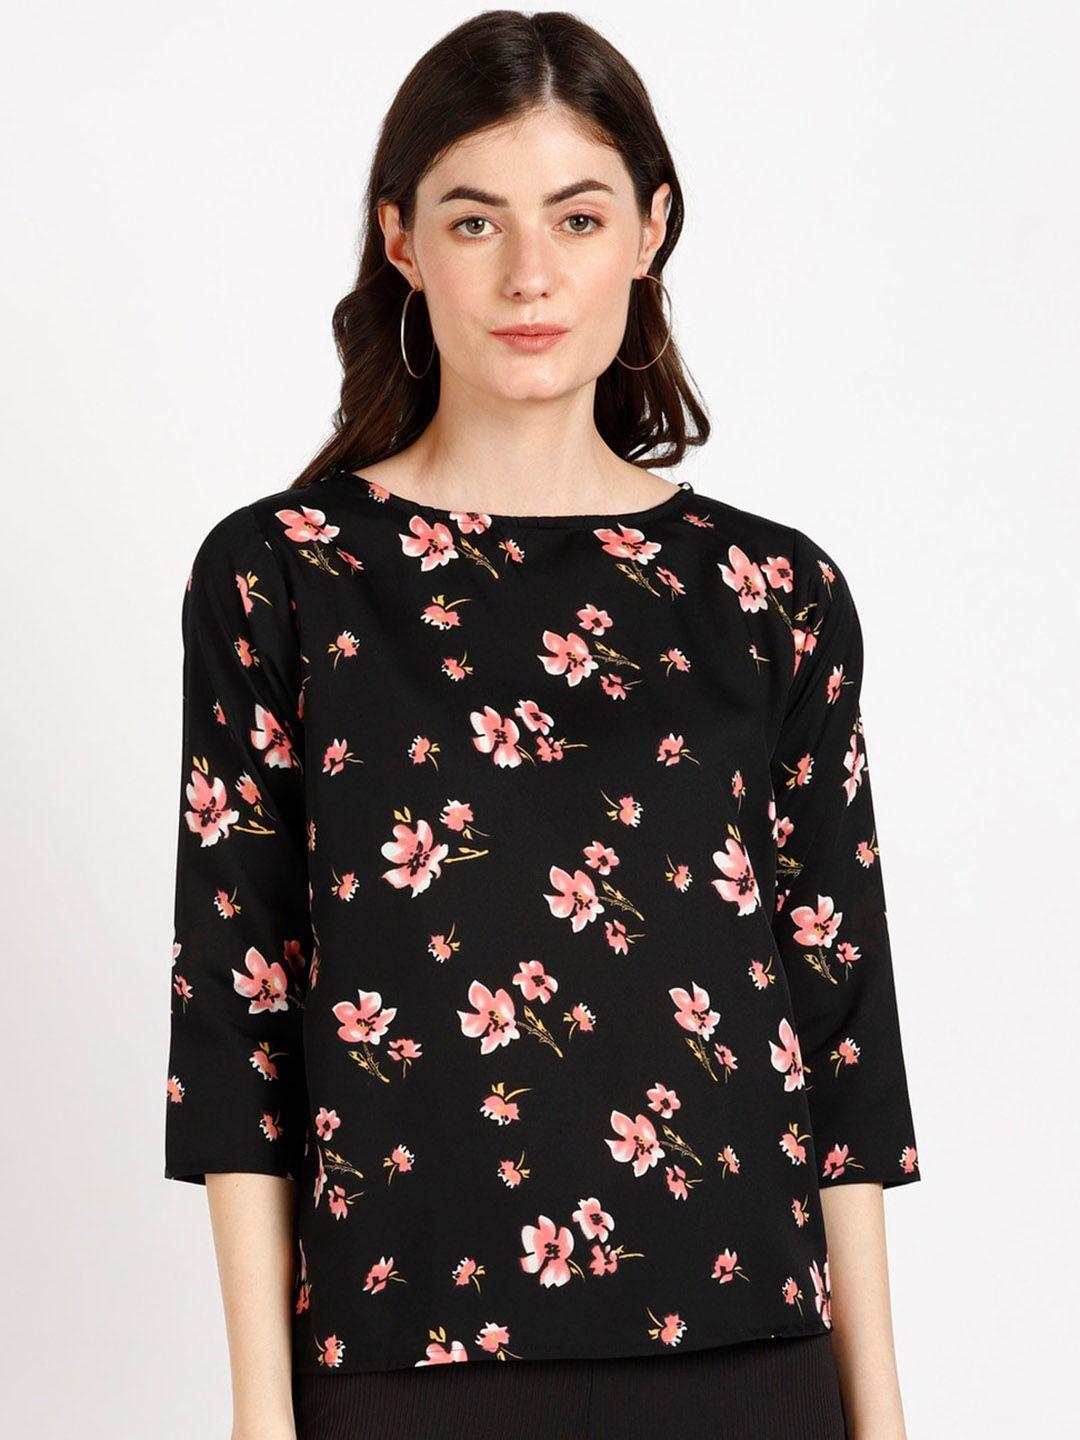 vahson floral printed round neck top